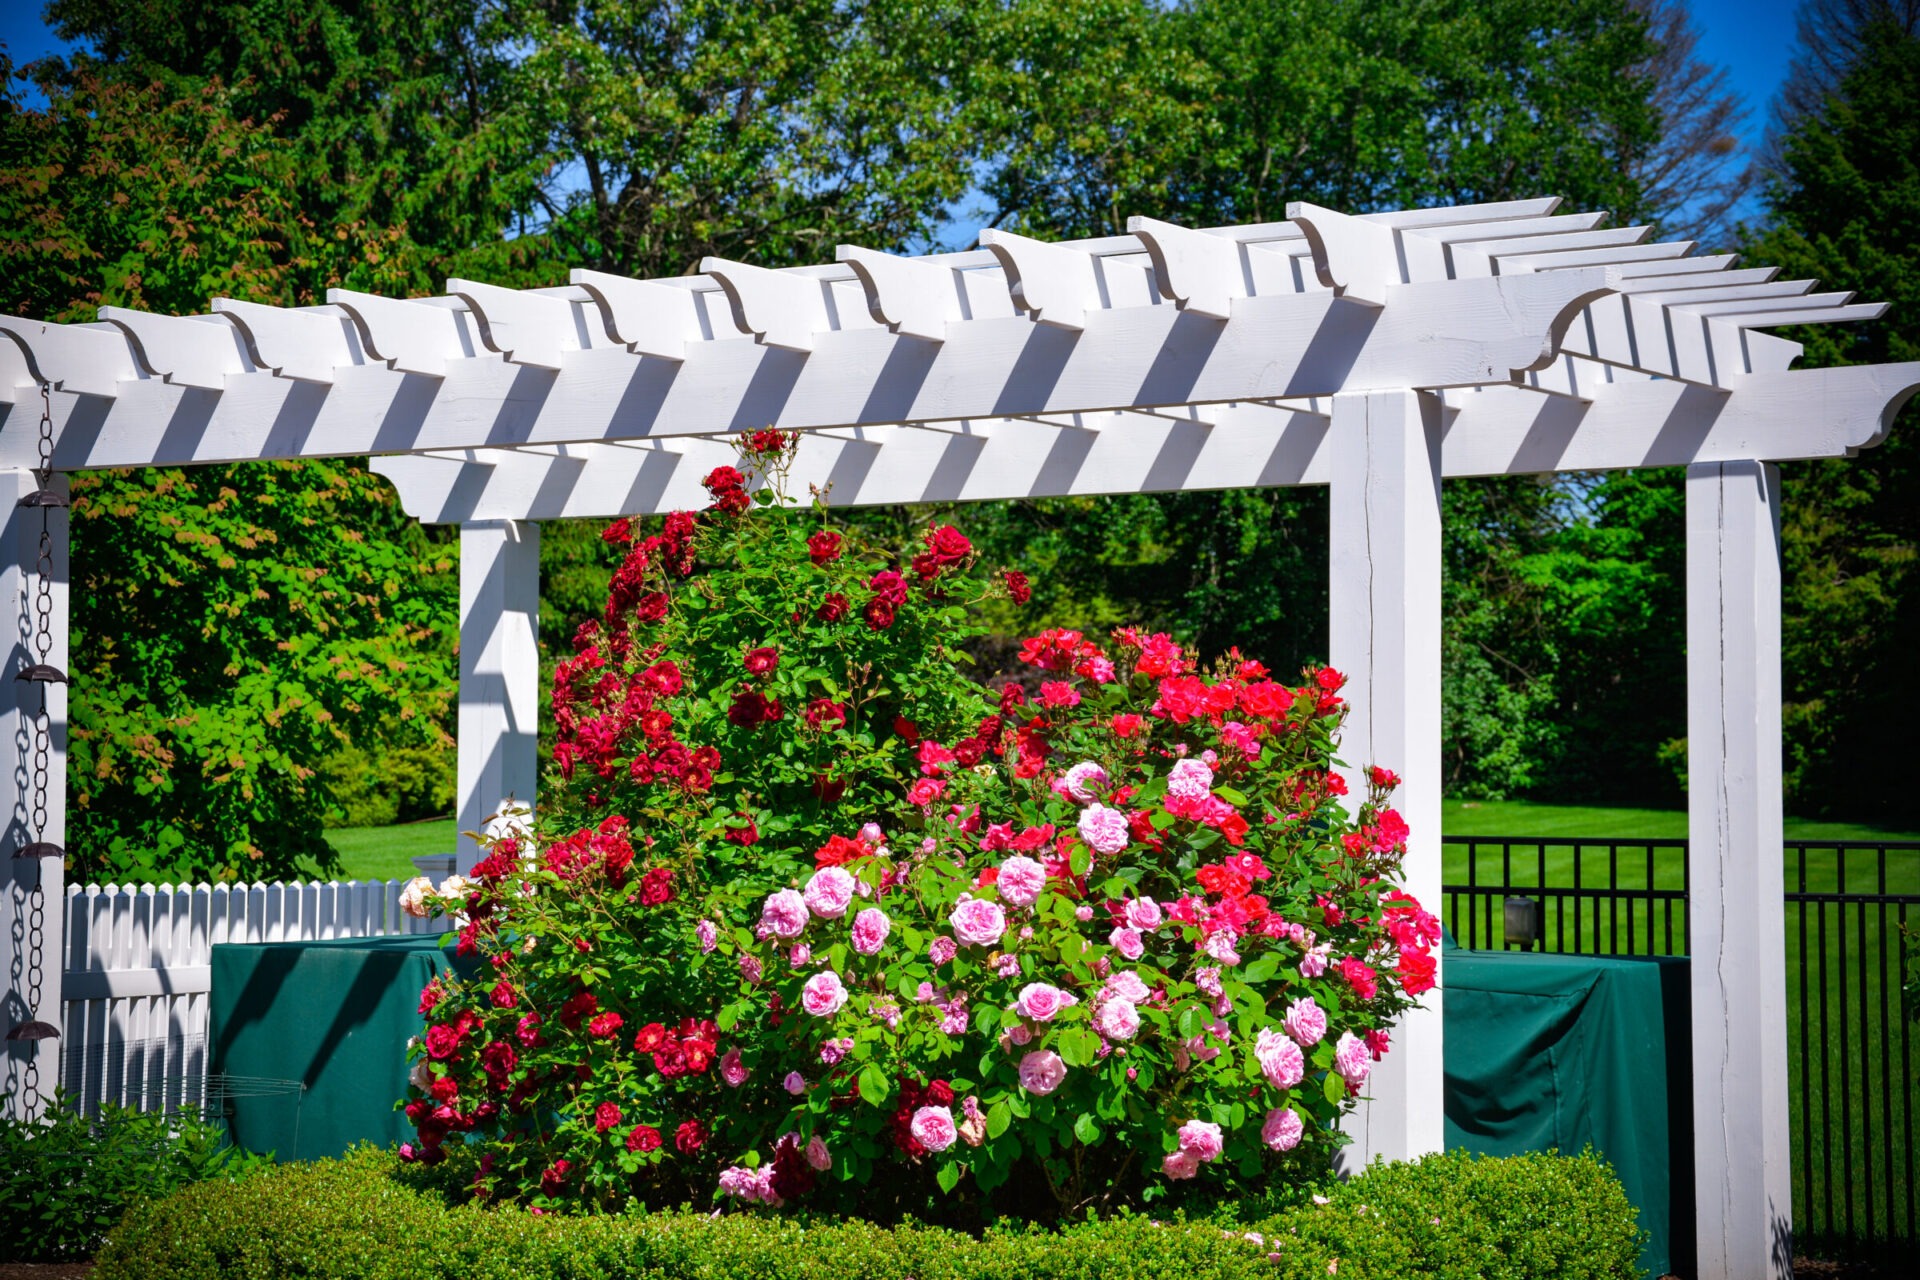 A white wooden pergola casts shadows over a vibrant array of red and pink roses, with lush green foliage and a clear blue sky.